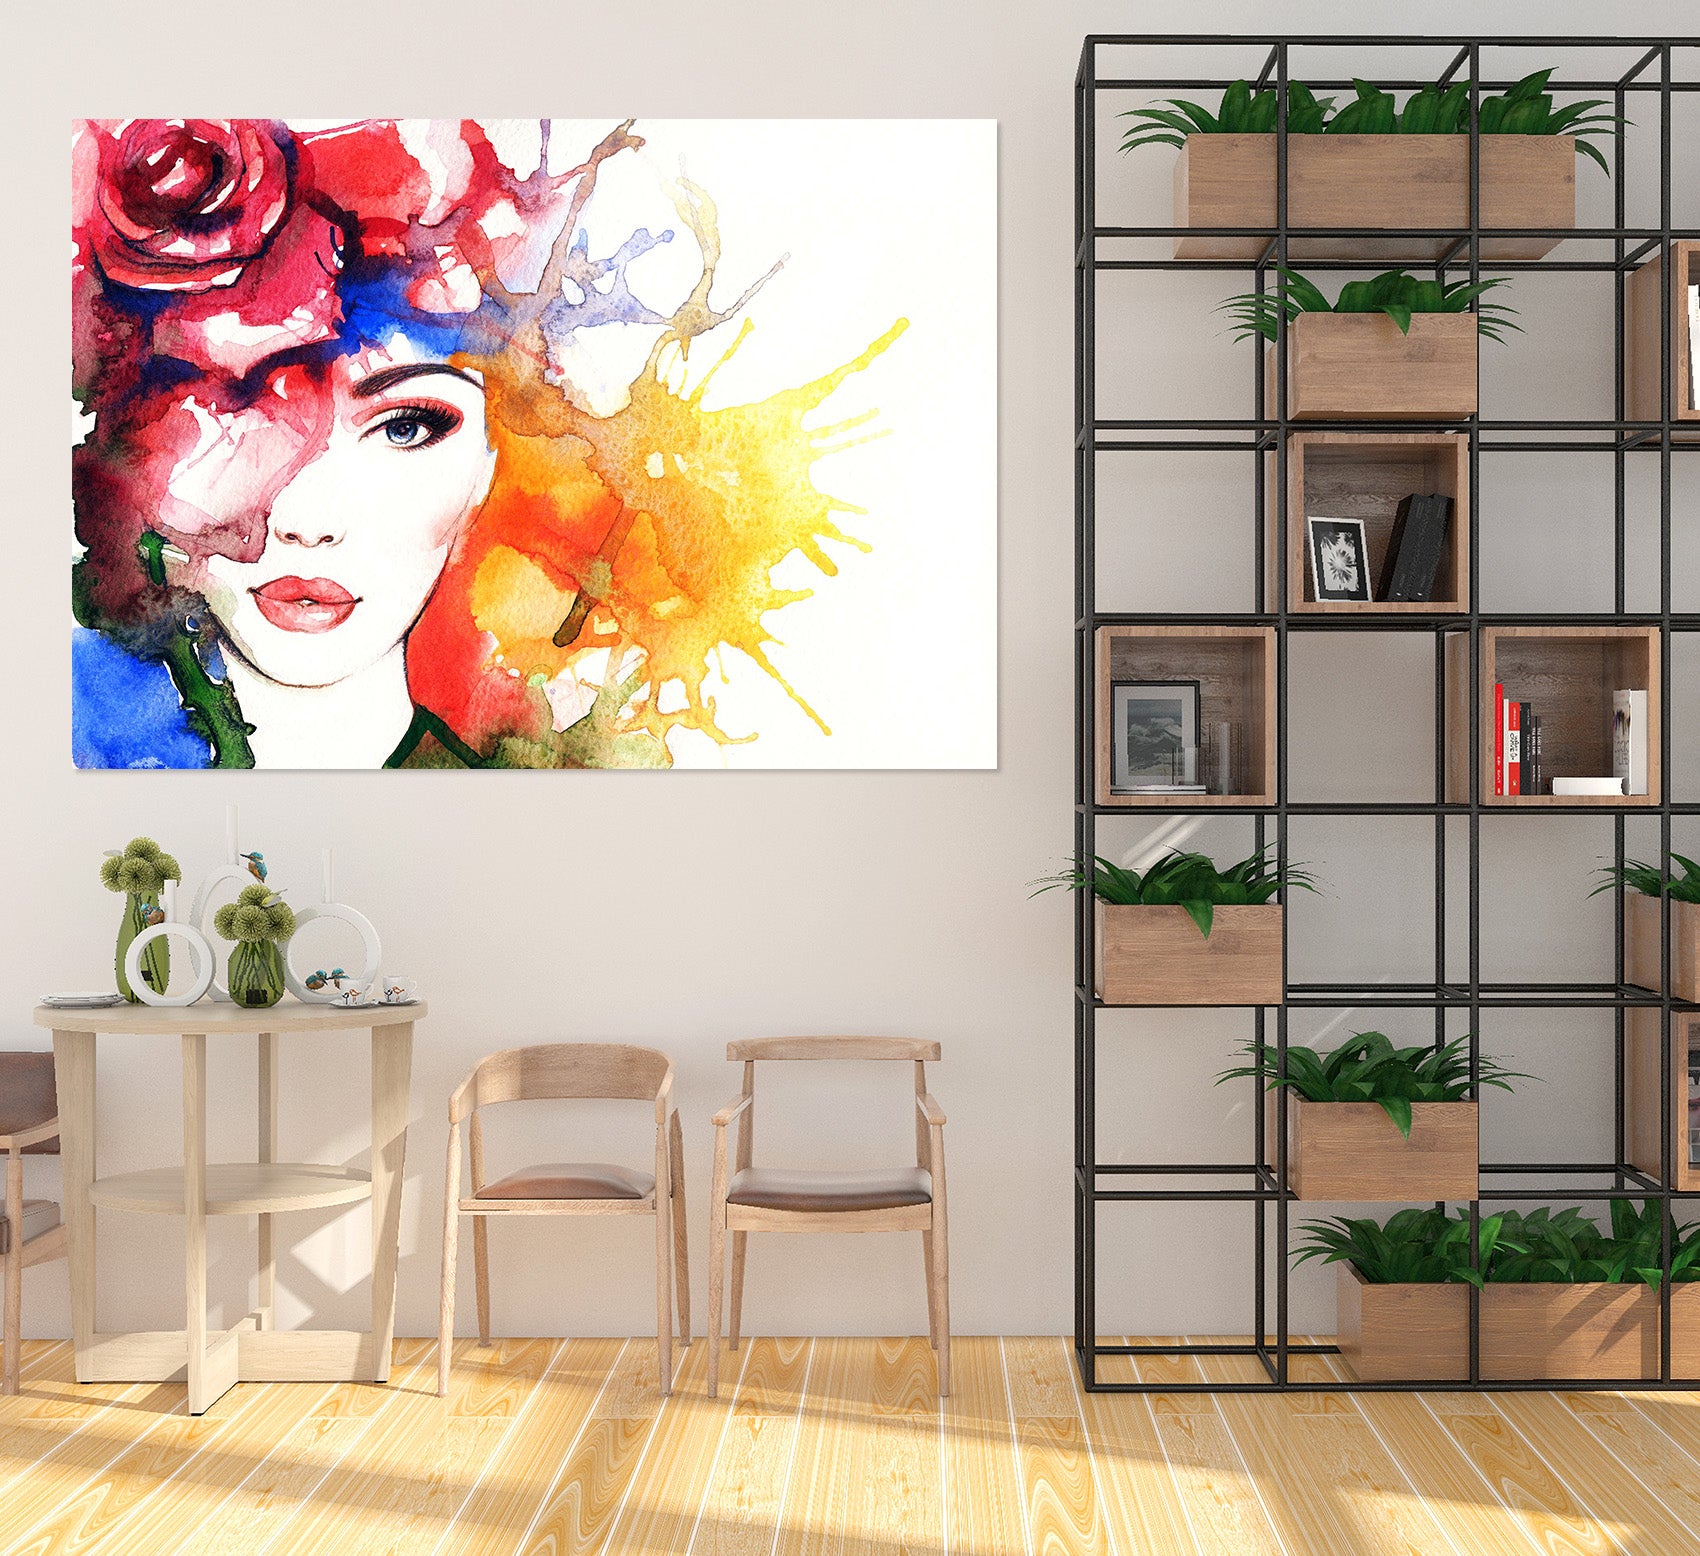 3D Red Rose Woman 1013 Wall Sticker